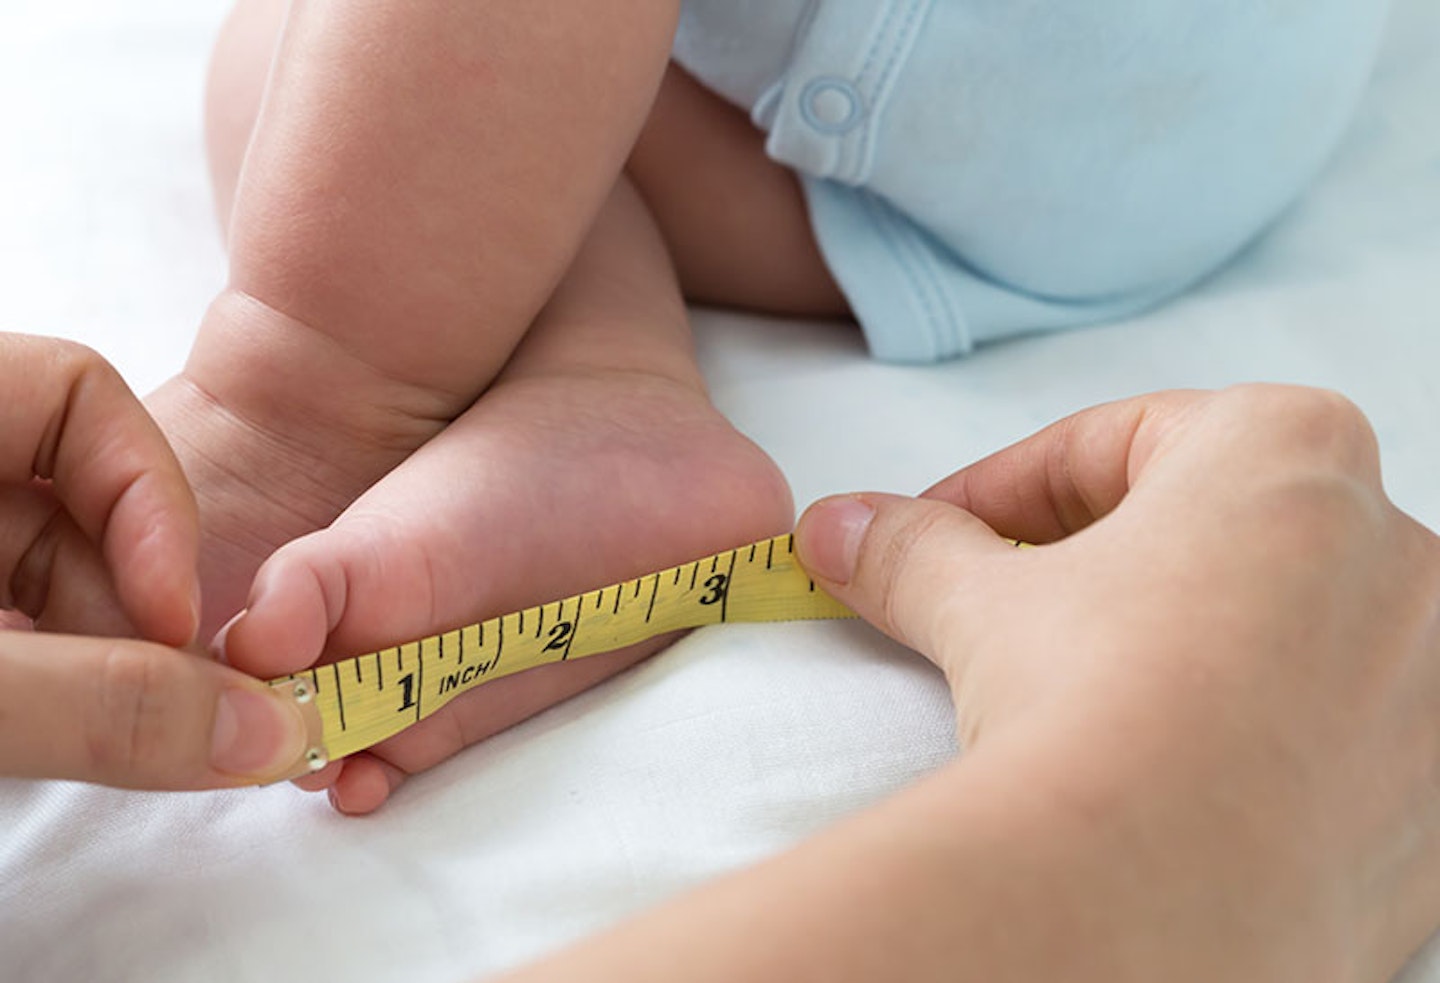 How to measure baby feet at home